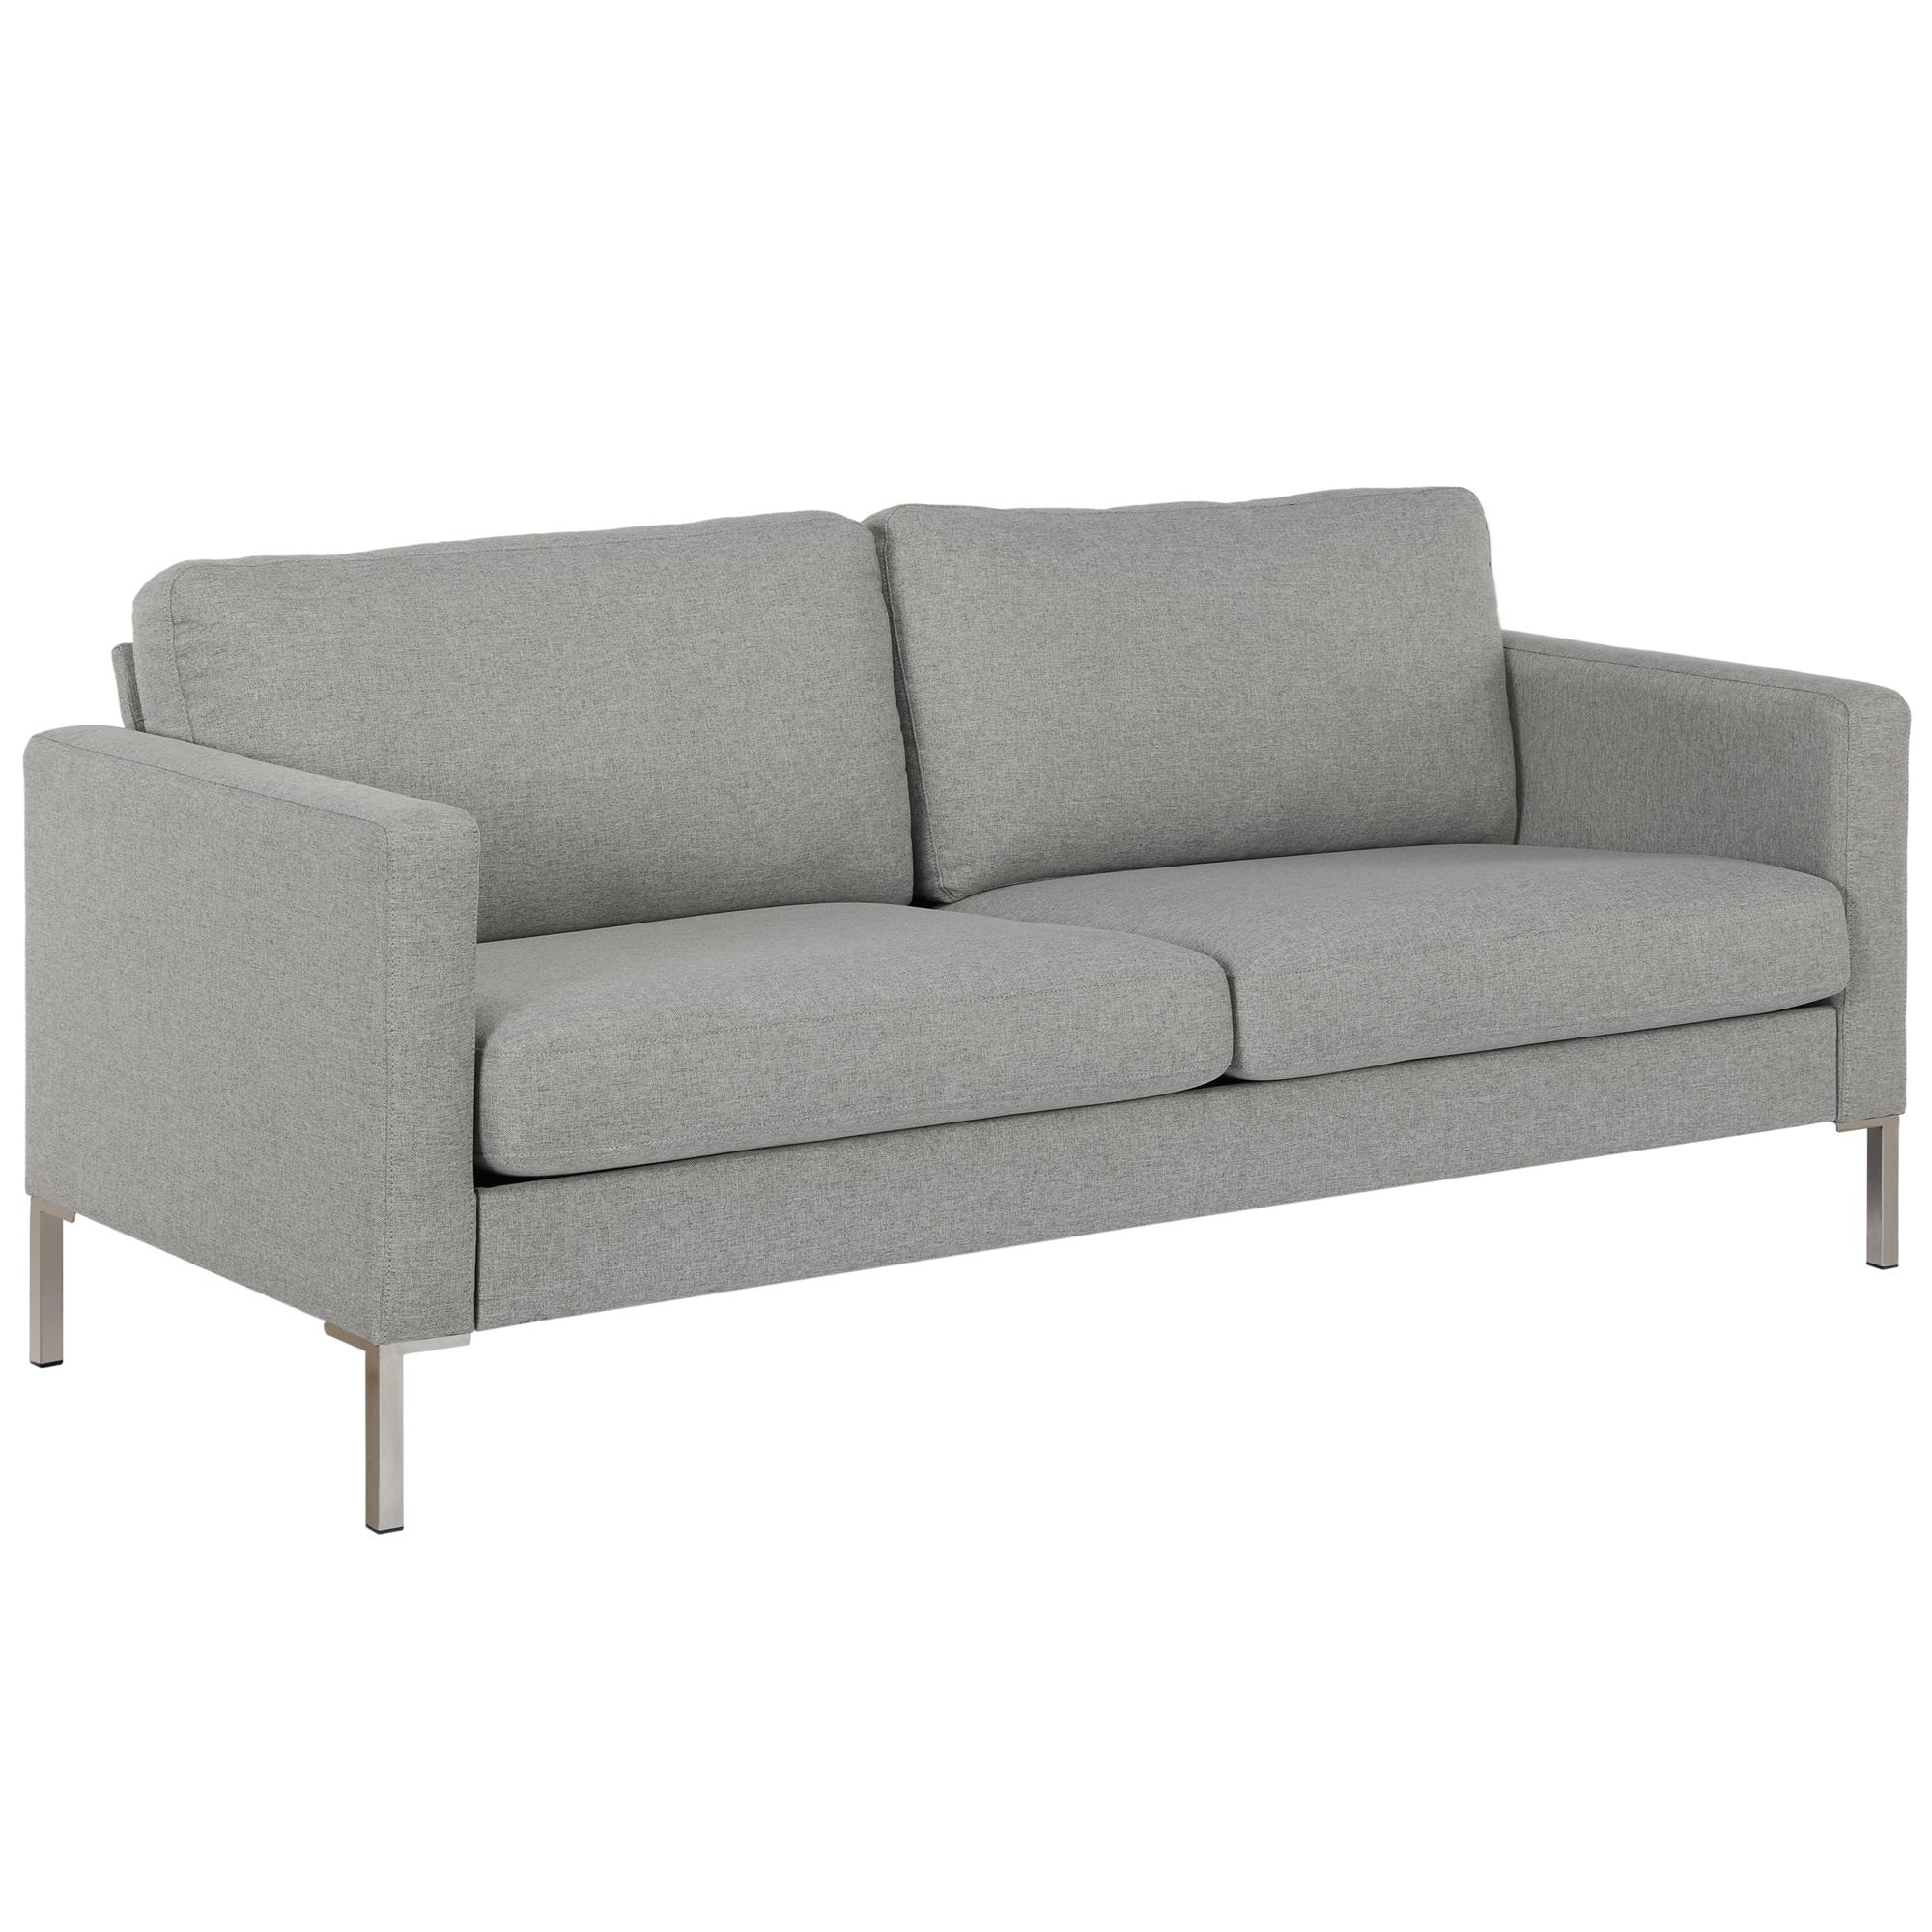 DHP Lexington Modern Sofa & Couch, Living Room Furniture, Gray Linen - image 4 of 14